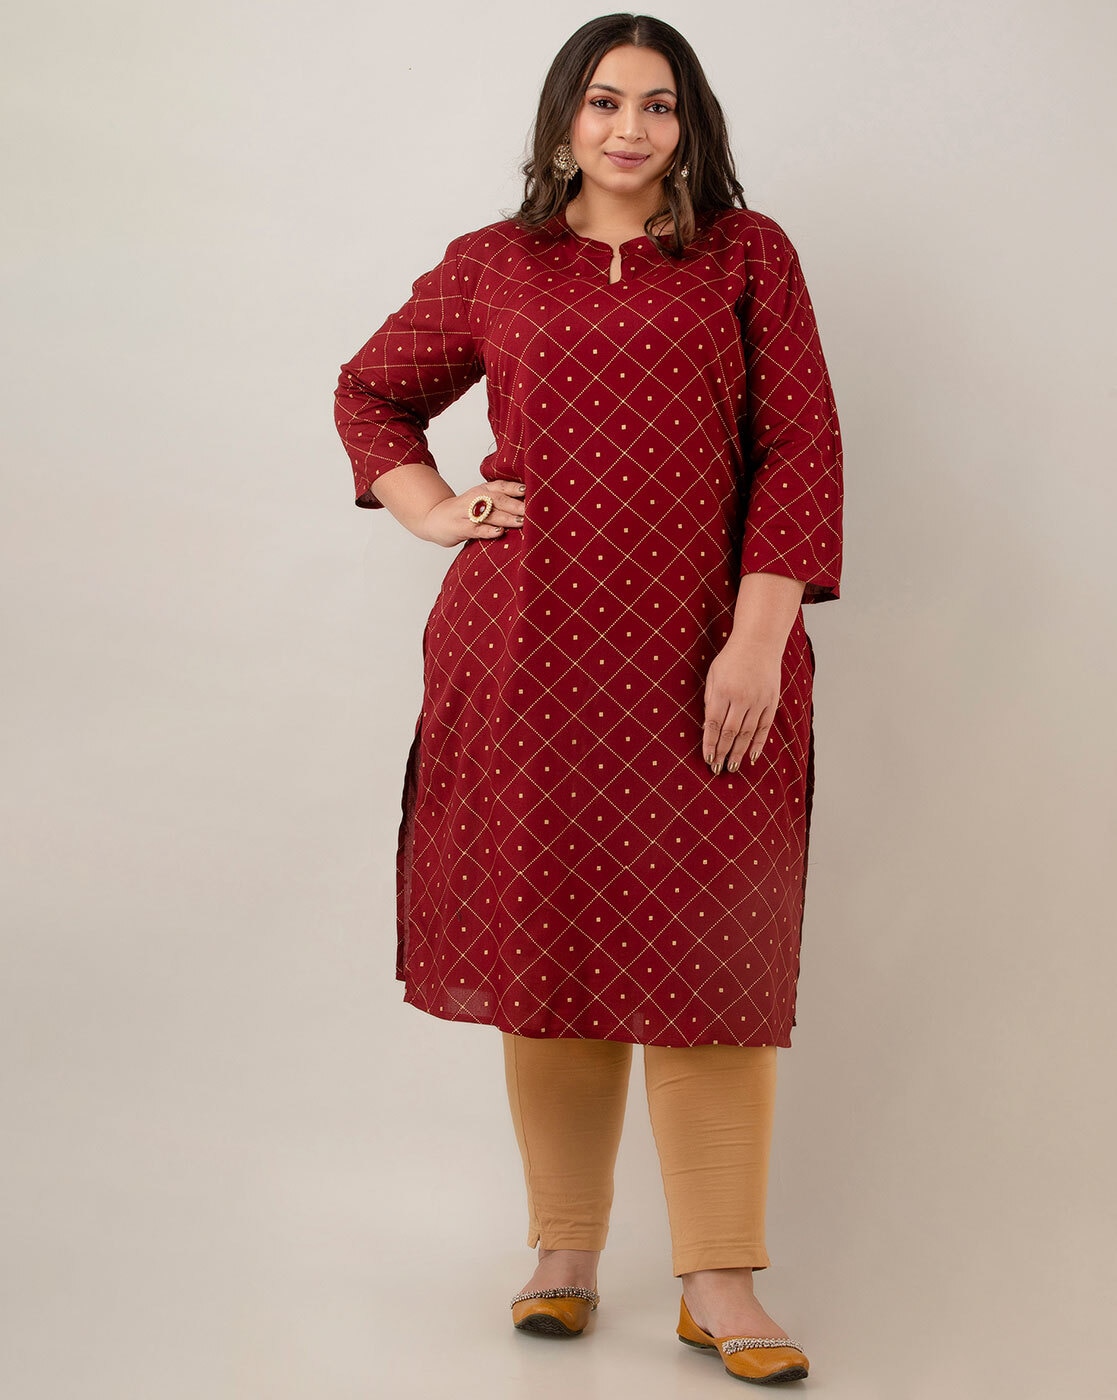 SEJAL BY MAYRA SEJAL HEAVY REYON PLAIN WITH MACHINE GOLD PRINT 3 LAYER  FULLY INTERLOCK UMBERALLA KURTI CATALOG WHOLESALER BEST RATE -  textiledeal.in